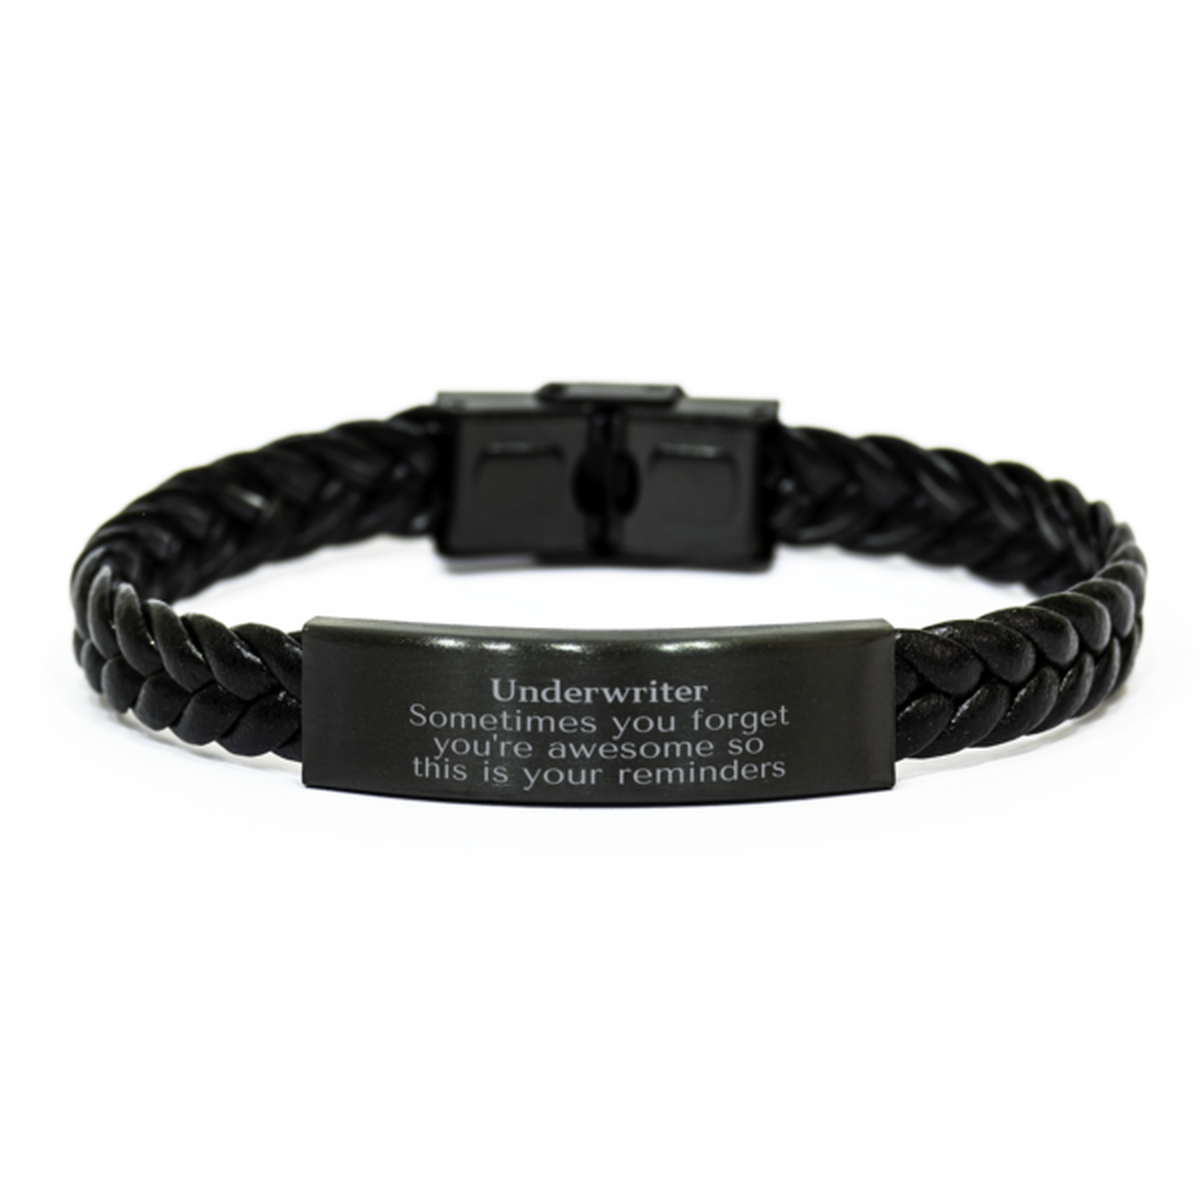 Sentimental Underwriter Braided Leather Bracelet, Underwriter Sometimes you forget you're awesome so this is your reminders, Graduation Christmas Birthday Gifts for Underwriter, Men, Women, Coworkers